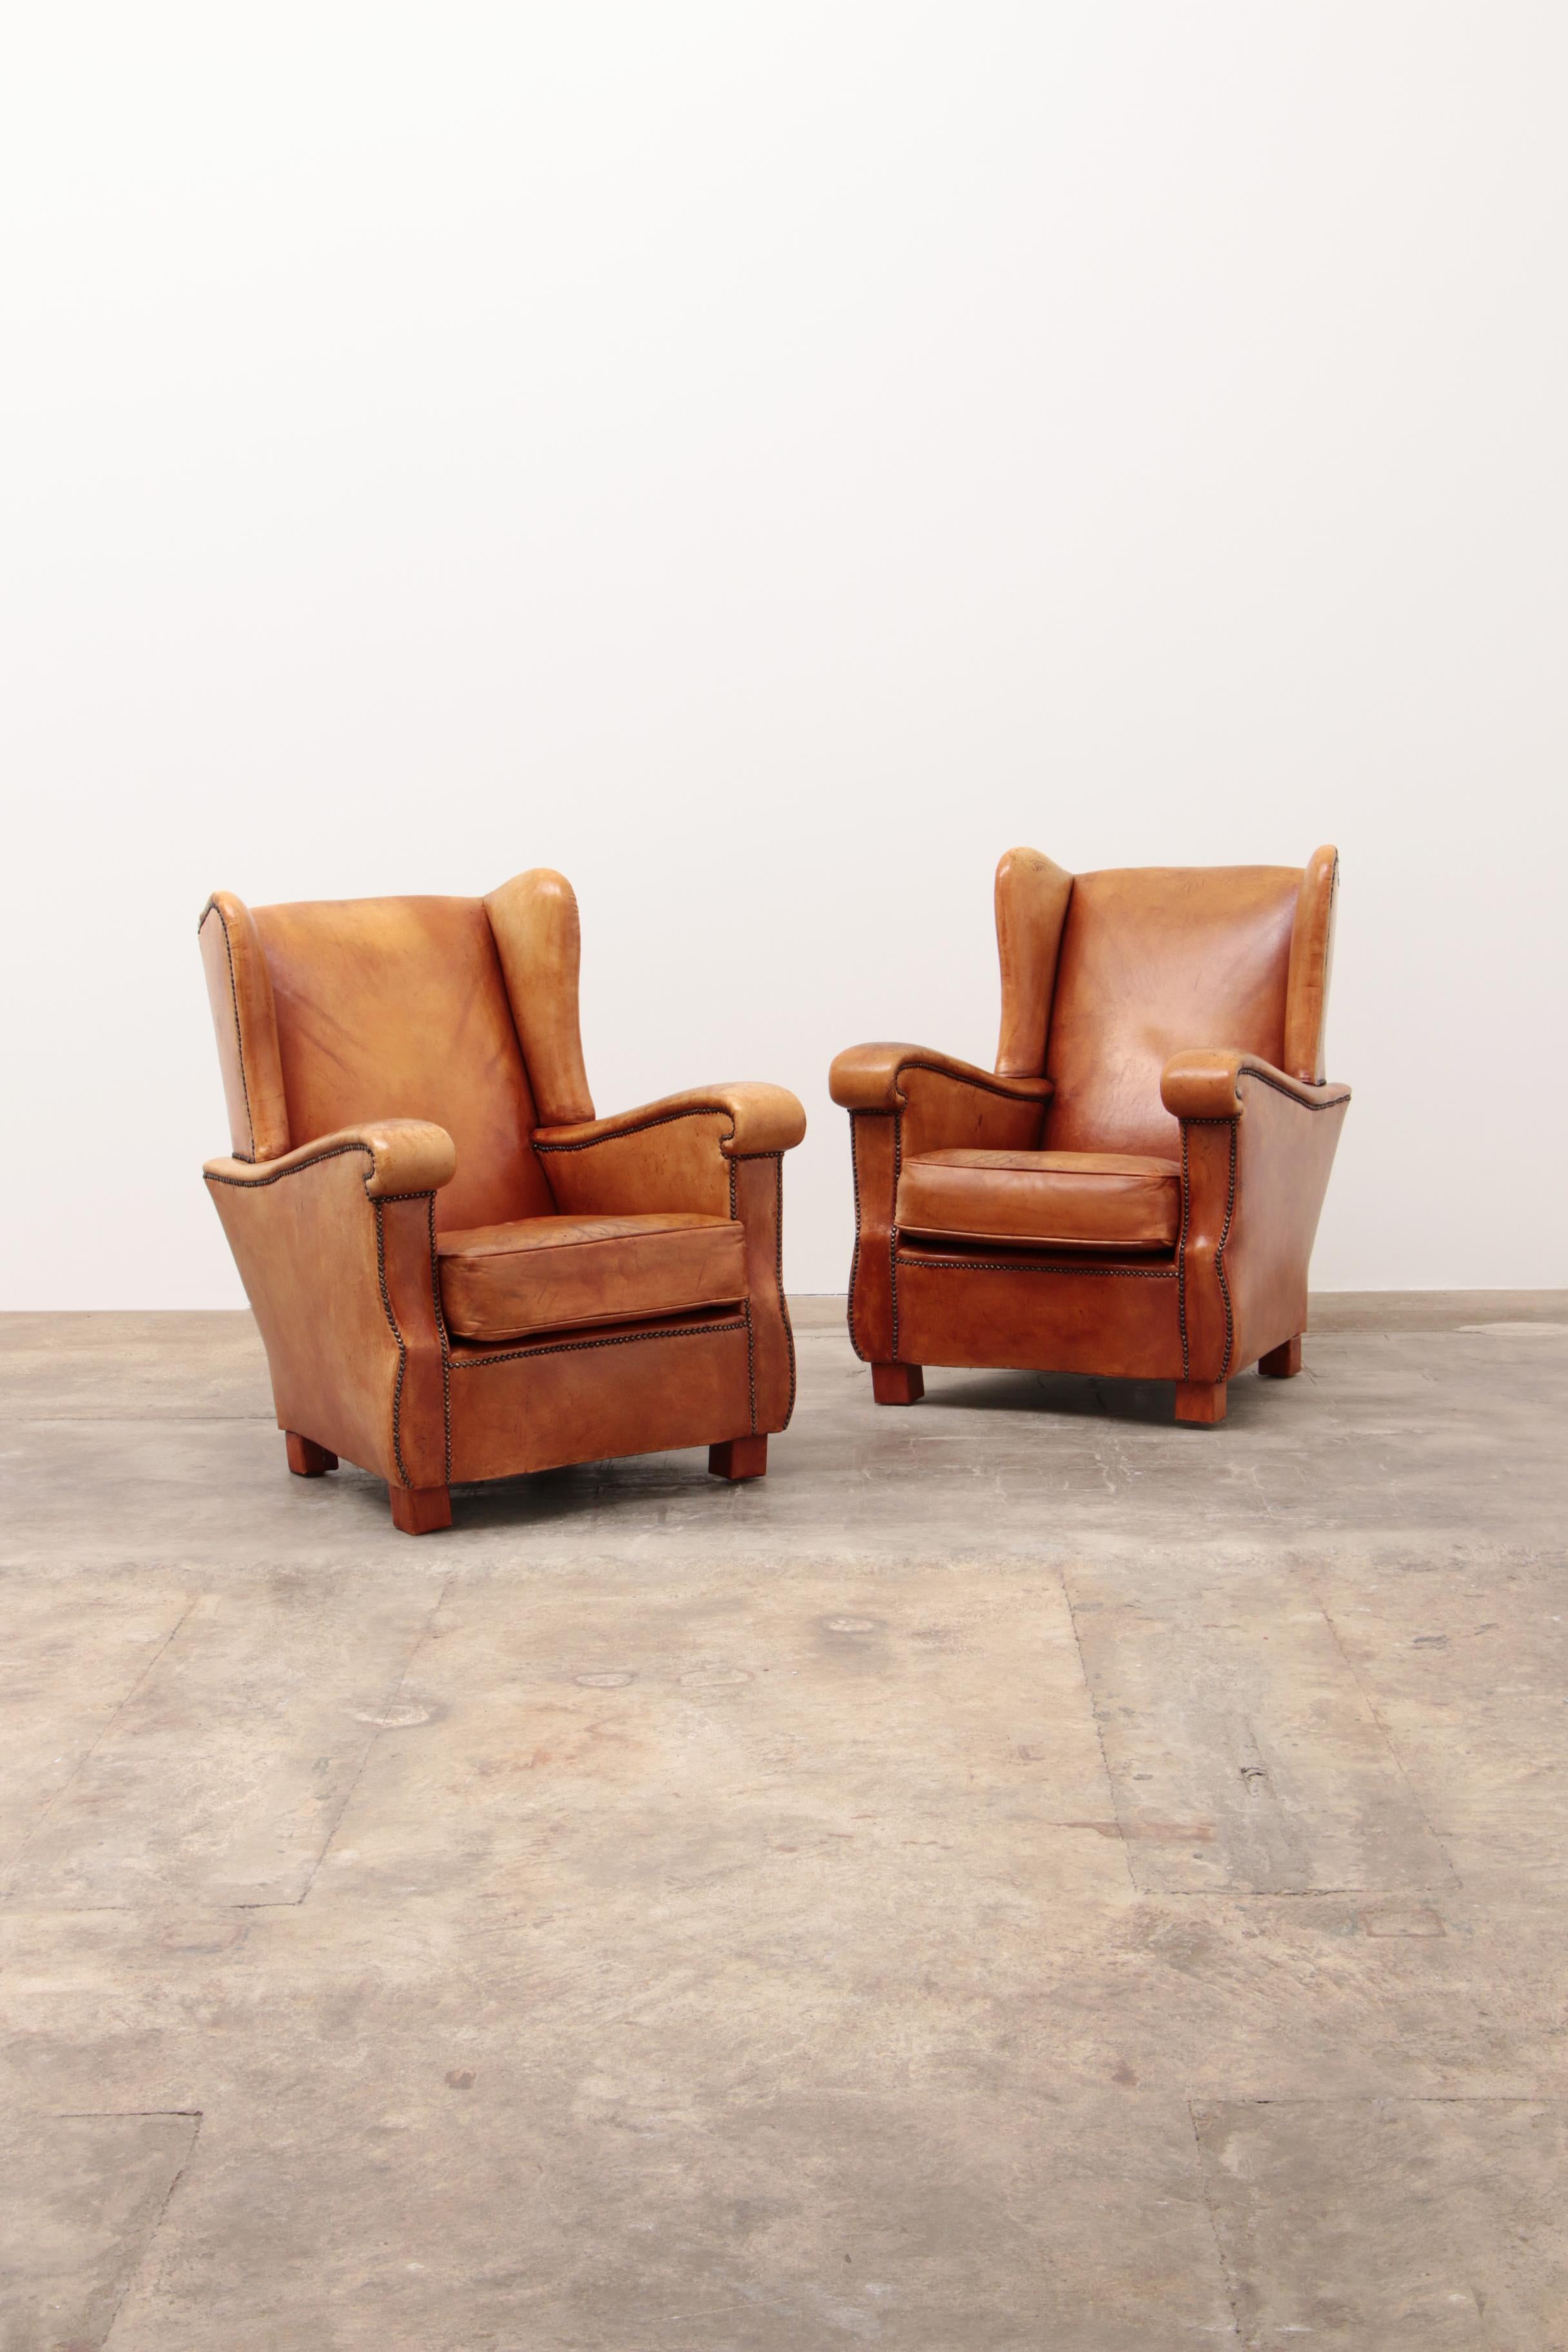 Set of beautiful sheep leather ear armchairs in excellent condition, finished with decorative furniture nails, a beautiful model.

The chairs still have a great seat and can last for years.

Sustainable: Environmentally conscious By